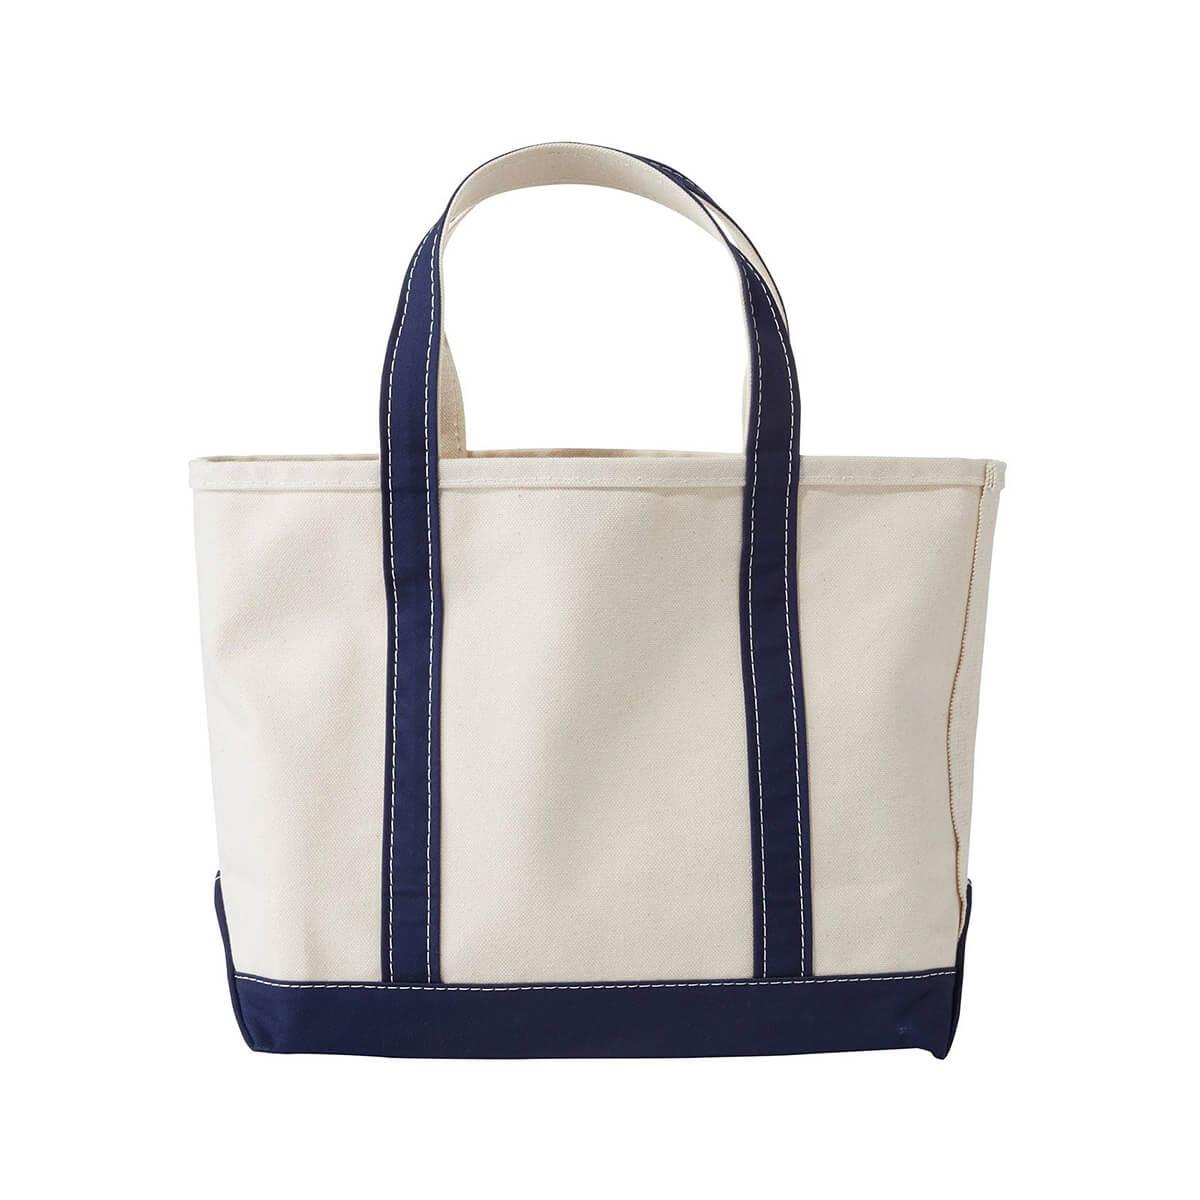 L.L.Bean Boat & Tote Bag, Reviewed: Is It Worth the Money?